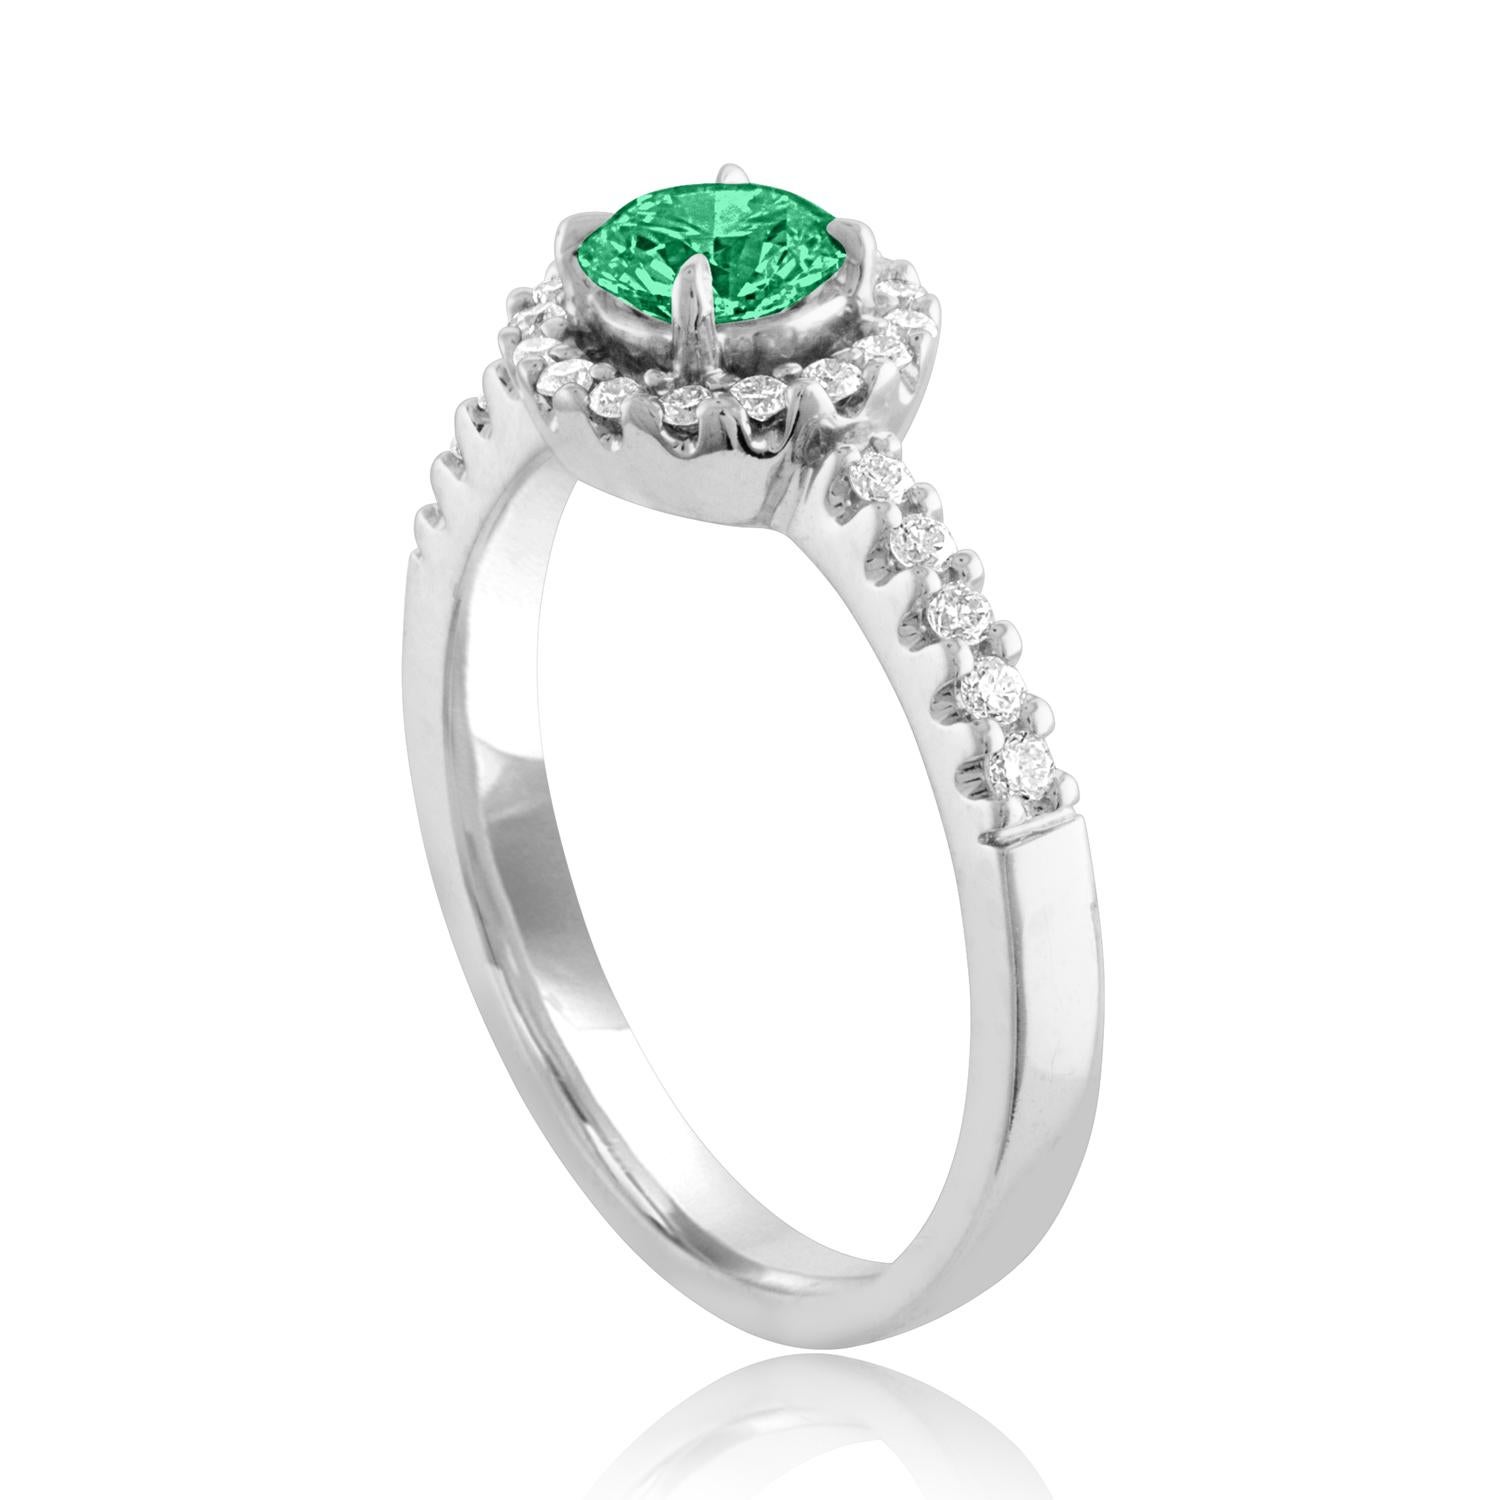 Beautiful Diamond & Emerald Halo Ring
The ring is 18K White Gold.
There are 0.22 Carats in Diamonds F/G VS/SI
The Center is Round 0.40 Carat Emerald.
The Emerald is AGL certified.
The ring is a size 6.25, sizable.
The ring weighs 3.8 grams.